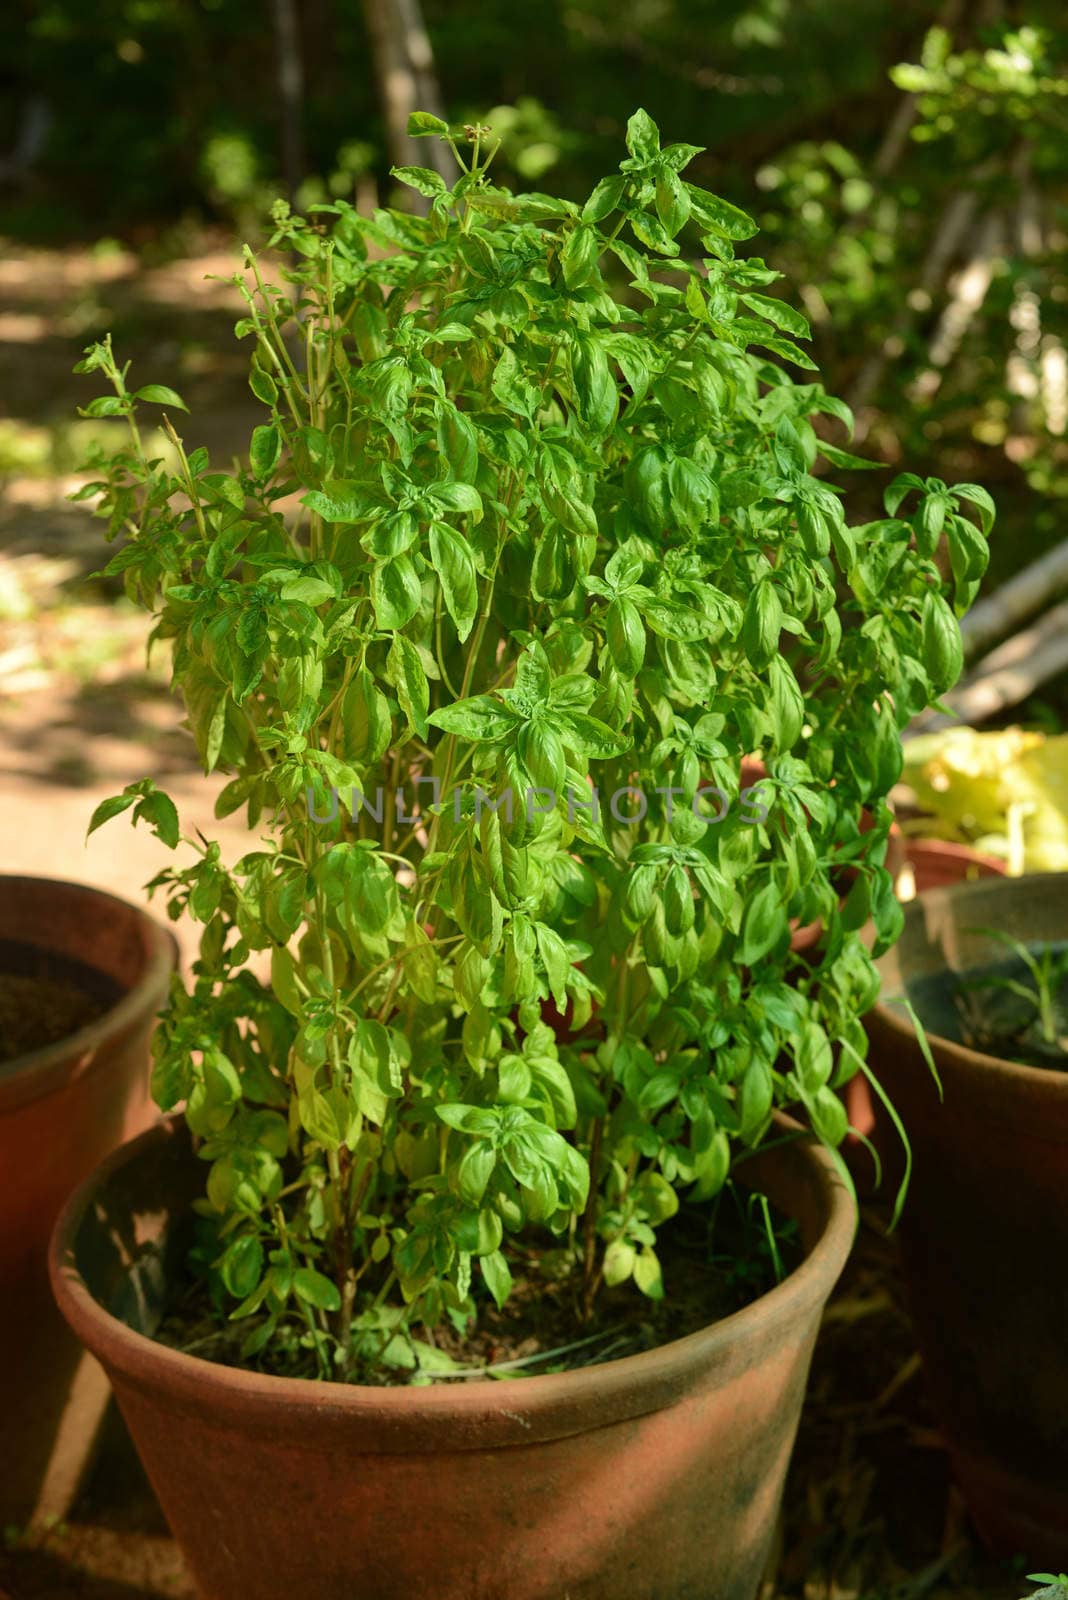 basil herb plant growing in a pot in a garden